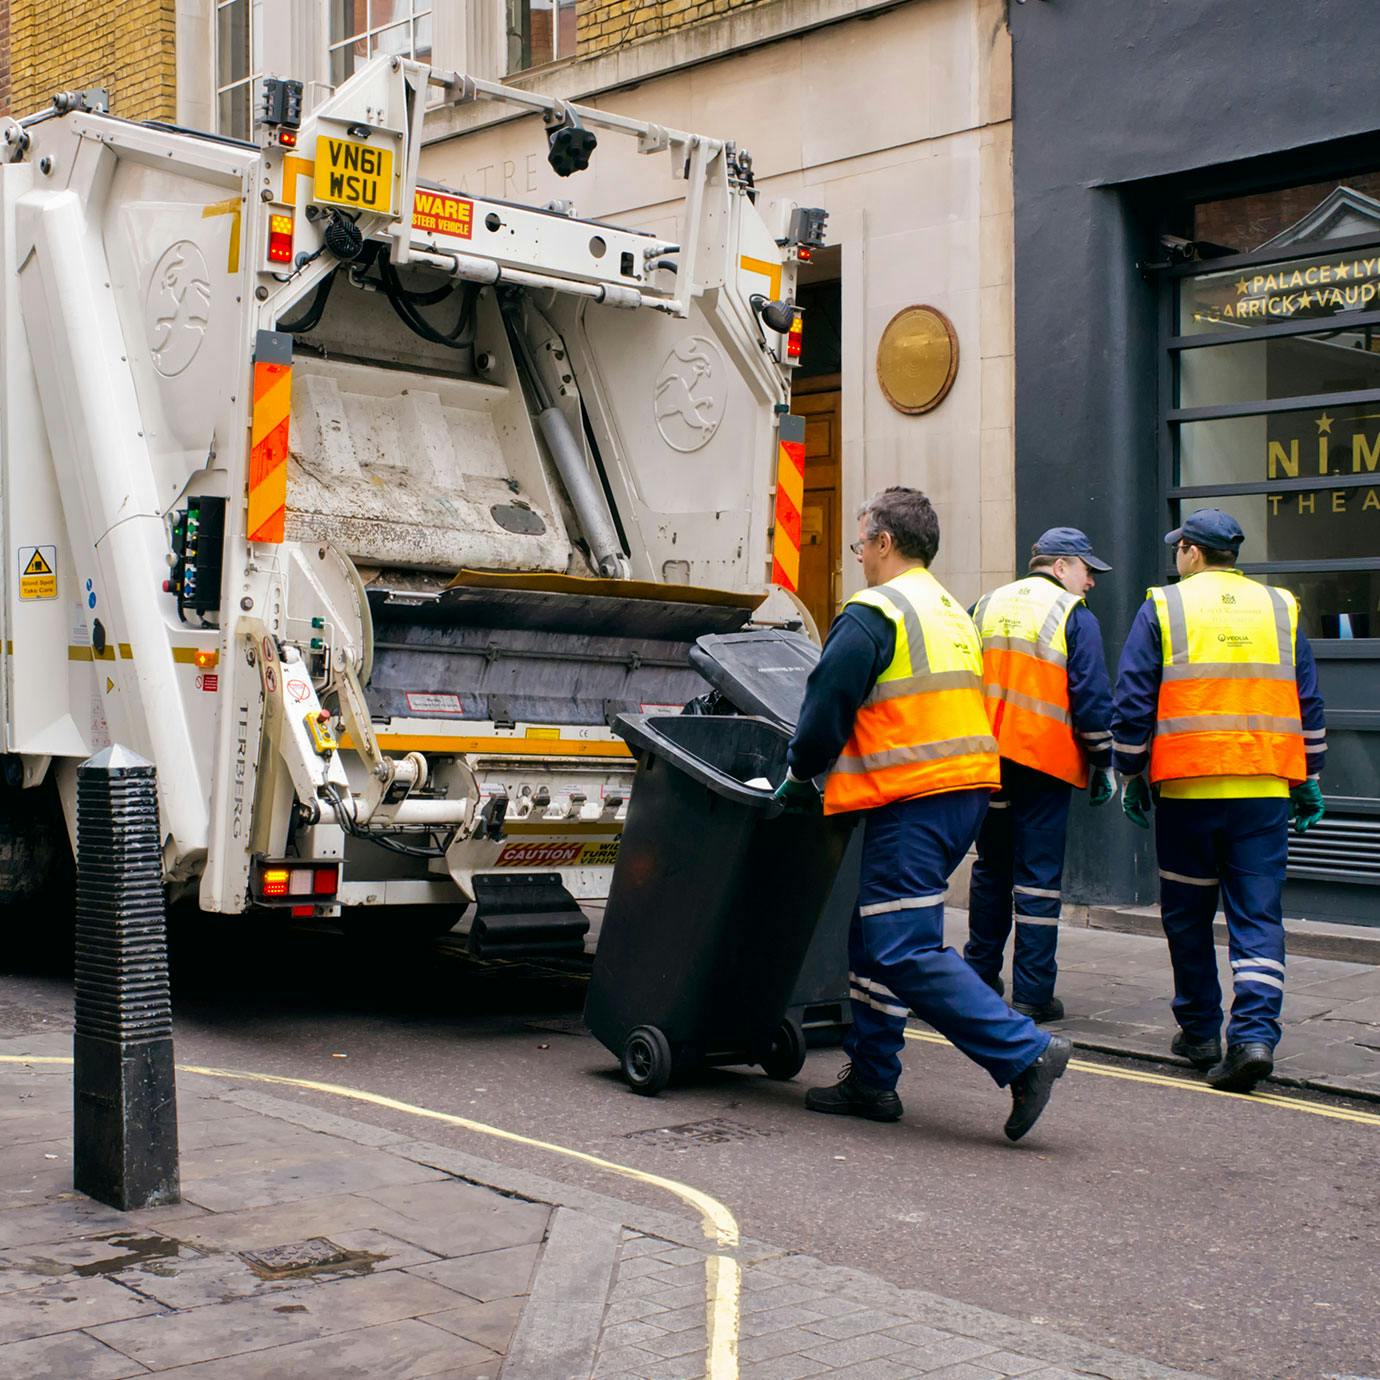 Refuse collectors disposing of bins in a lorry